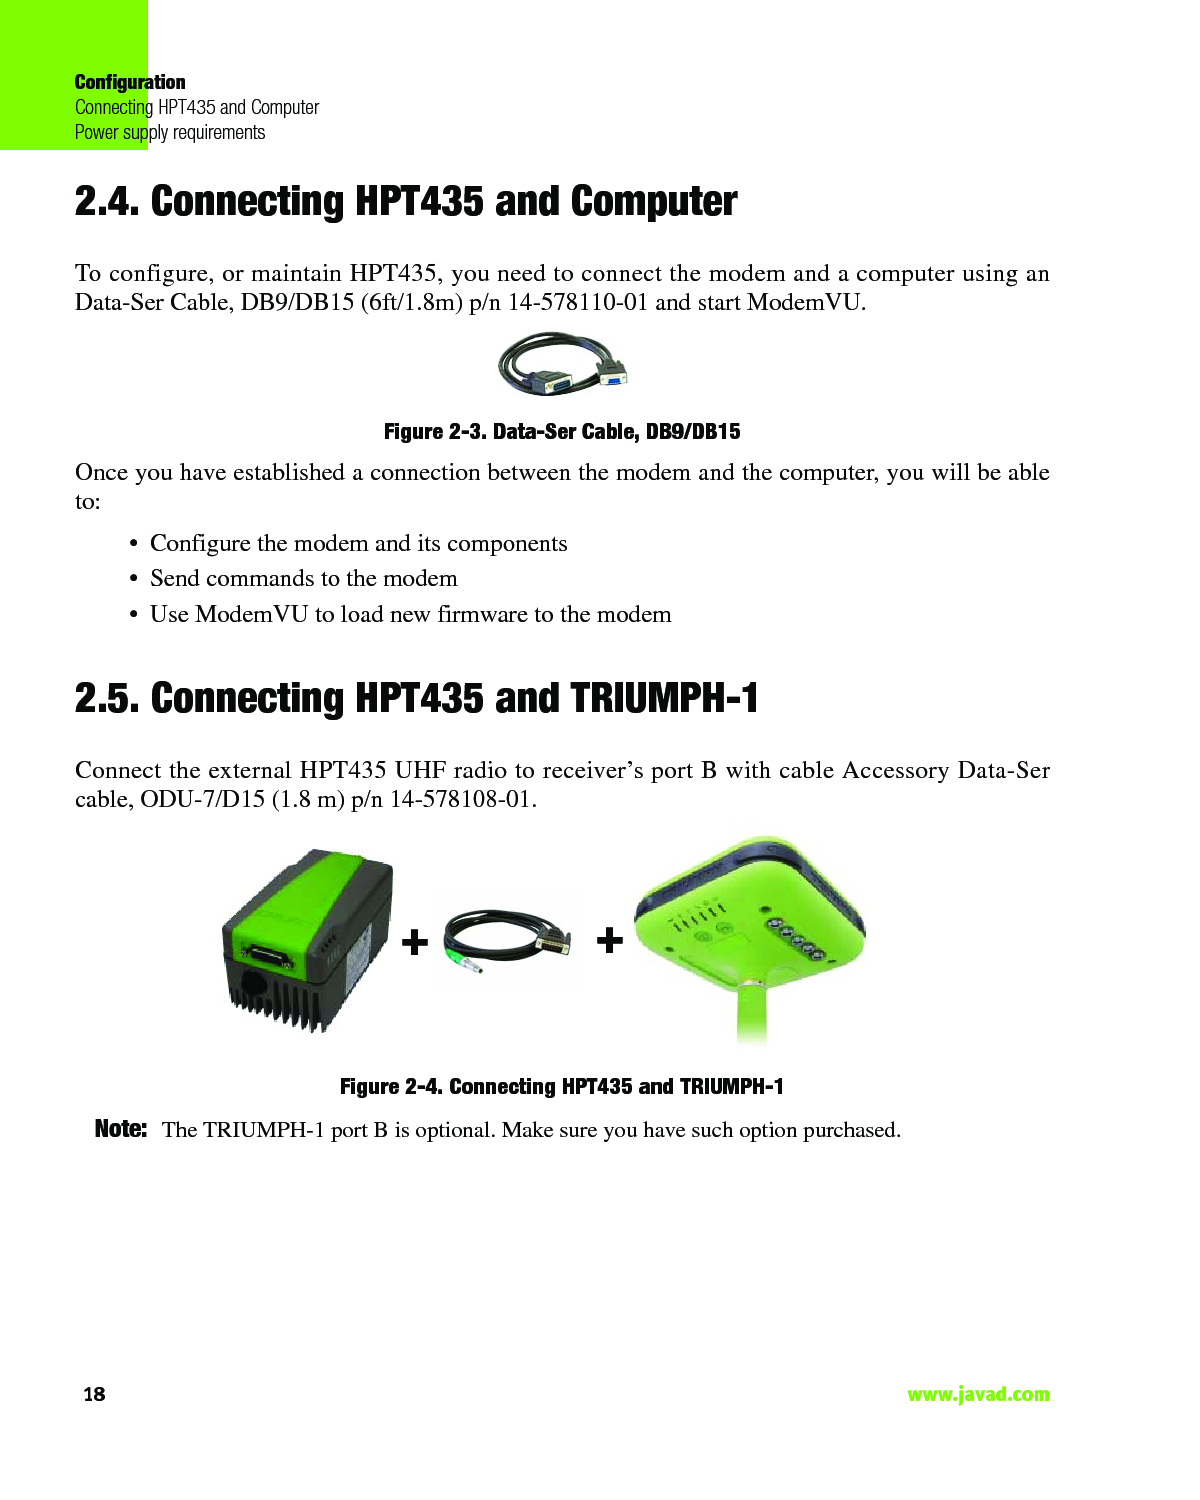 ConfigurationConnecting HPT435 and ComputerPower supply requirements18                                                                                                                     www.javad.com2.4. Connecting HPT435 and ComputerTo configure, or maintain HPT435, you need to connect the modem and a computer using anData-Ser Cable, DB9/DB15 (6ft/1.8m) p/n 14-578110-01 and start ModemVU. Figure 2-3. Data-Ser Cable, DB9/DB15 Once you have established a connection between the modem and the computer, you will be ableto:• Configure the modem and its components• Send commands to the modem• Use ModemVU to load new firmware to the modem2.5. Connecting HPT435 and TRIUMPH-1Connect the external HPT435 UHF radio to receiver’s port B with cable Accessory Data-Sercable, ODU-7/D15 (1.8 m) p/n 14-578108-01.Figure 2-4. Connecting HPT435 and TRIUMPH-1Note: The TRIUMPH-1 port B is optional. Make sure you have such option purchased.++